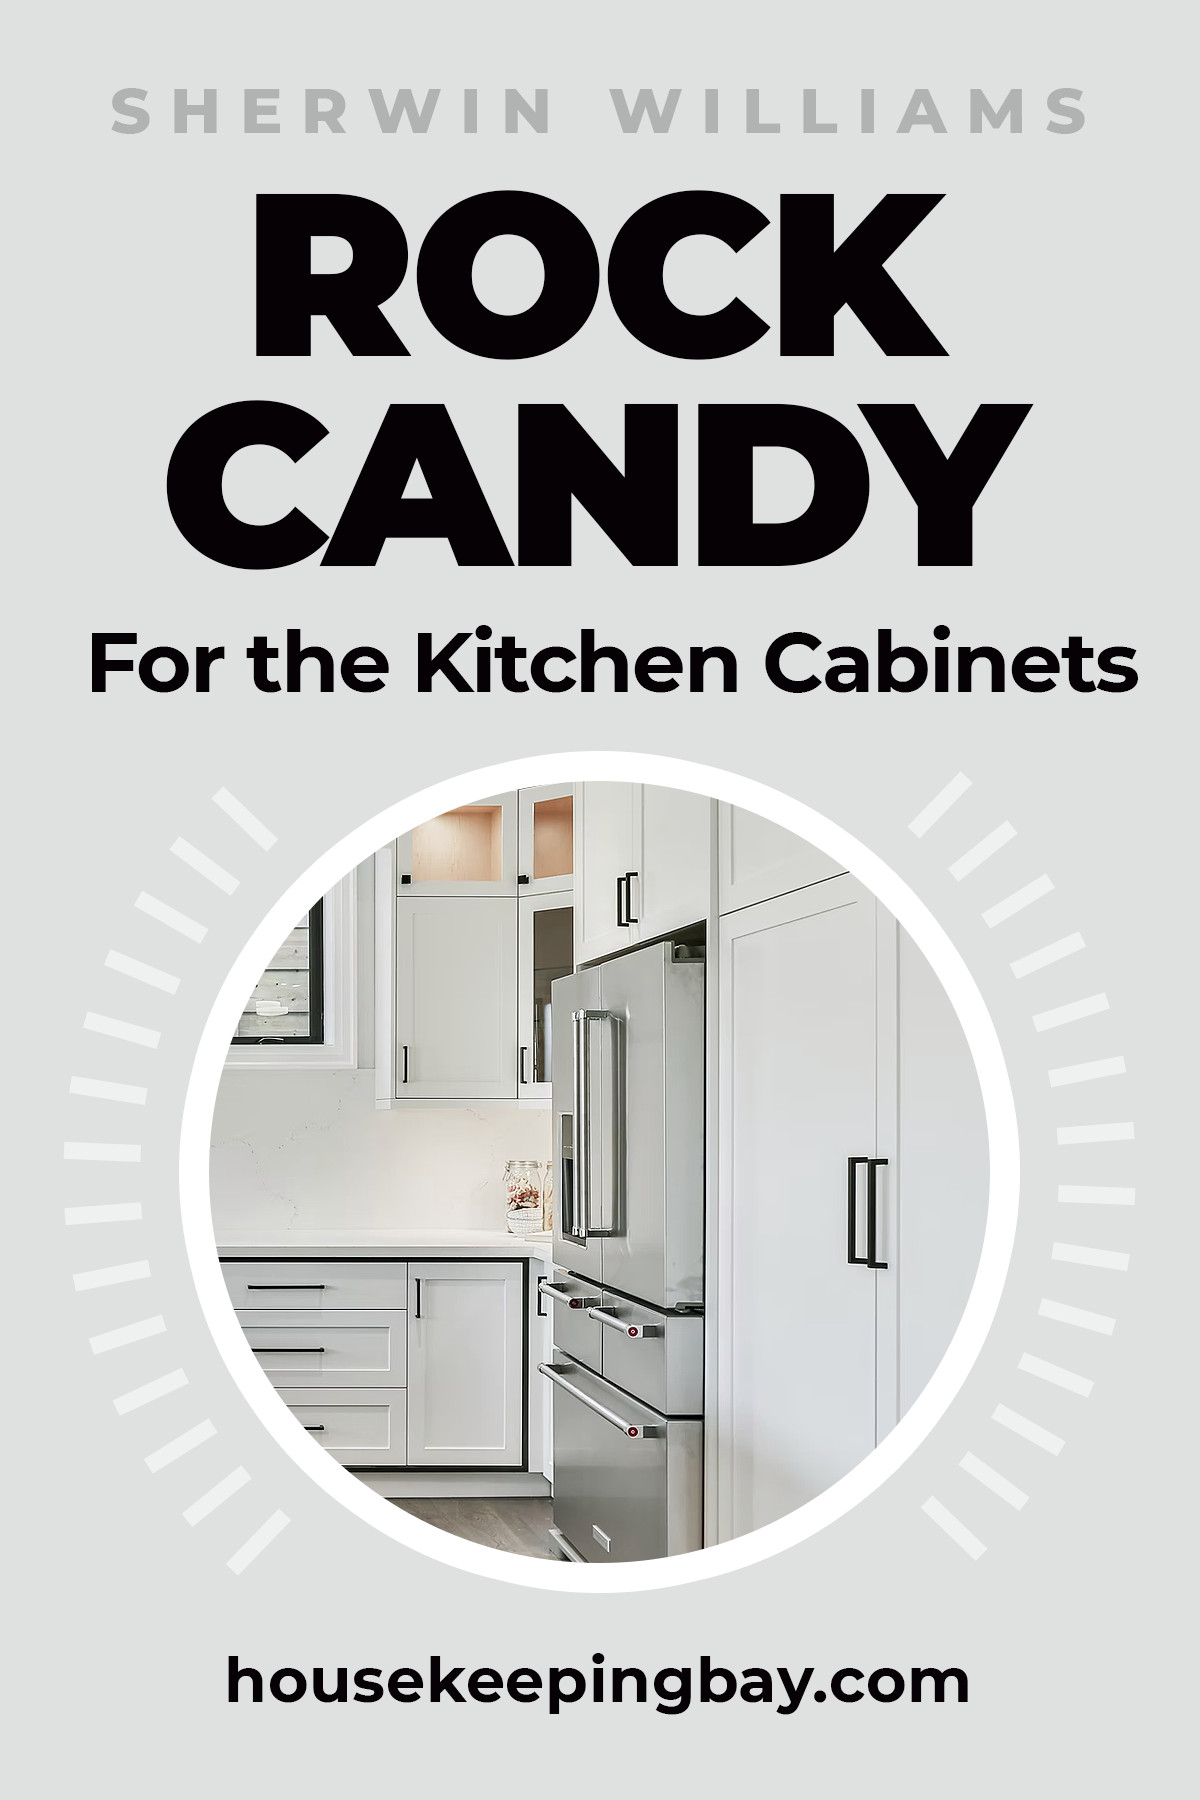 Rock Candy For the Kitchen Cabinets